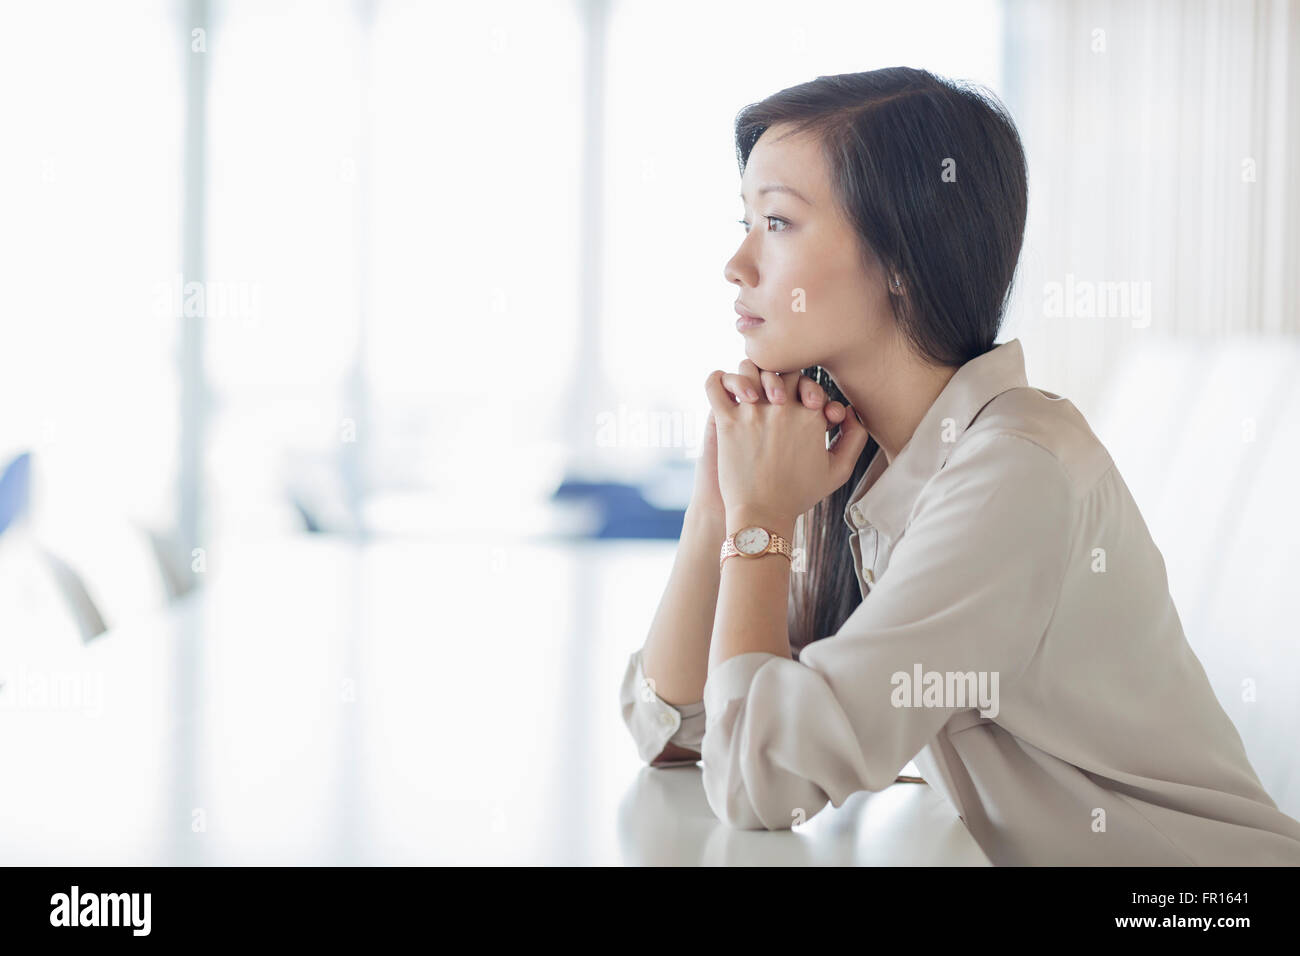 Pensive businesswoman looking away in conference room Banque D'Images